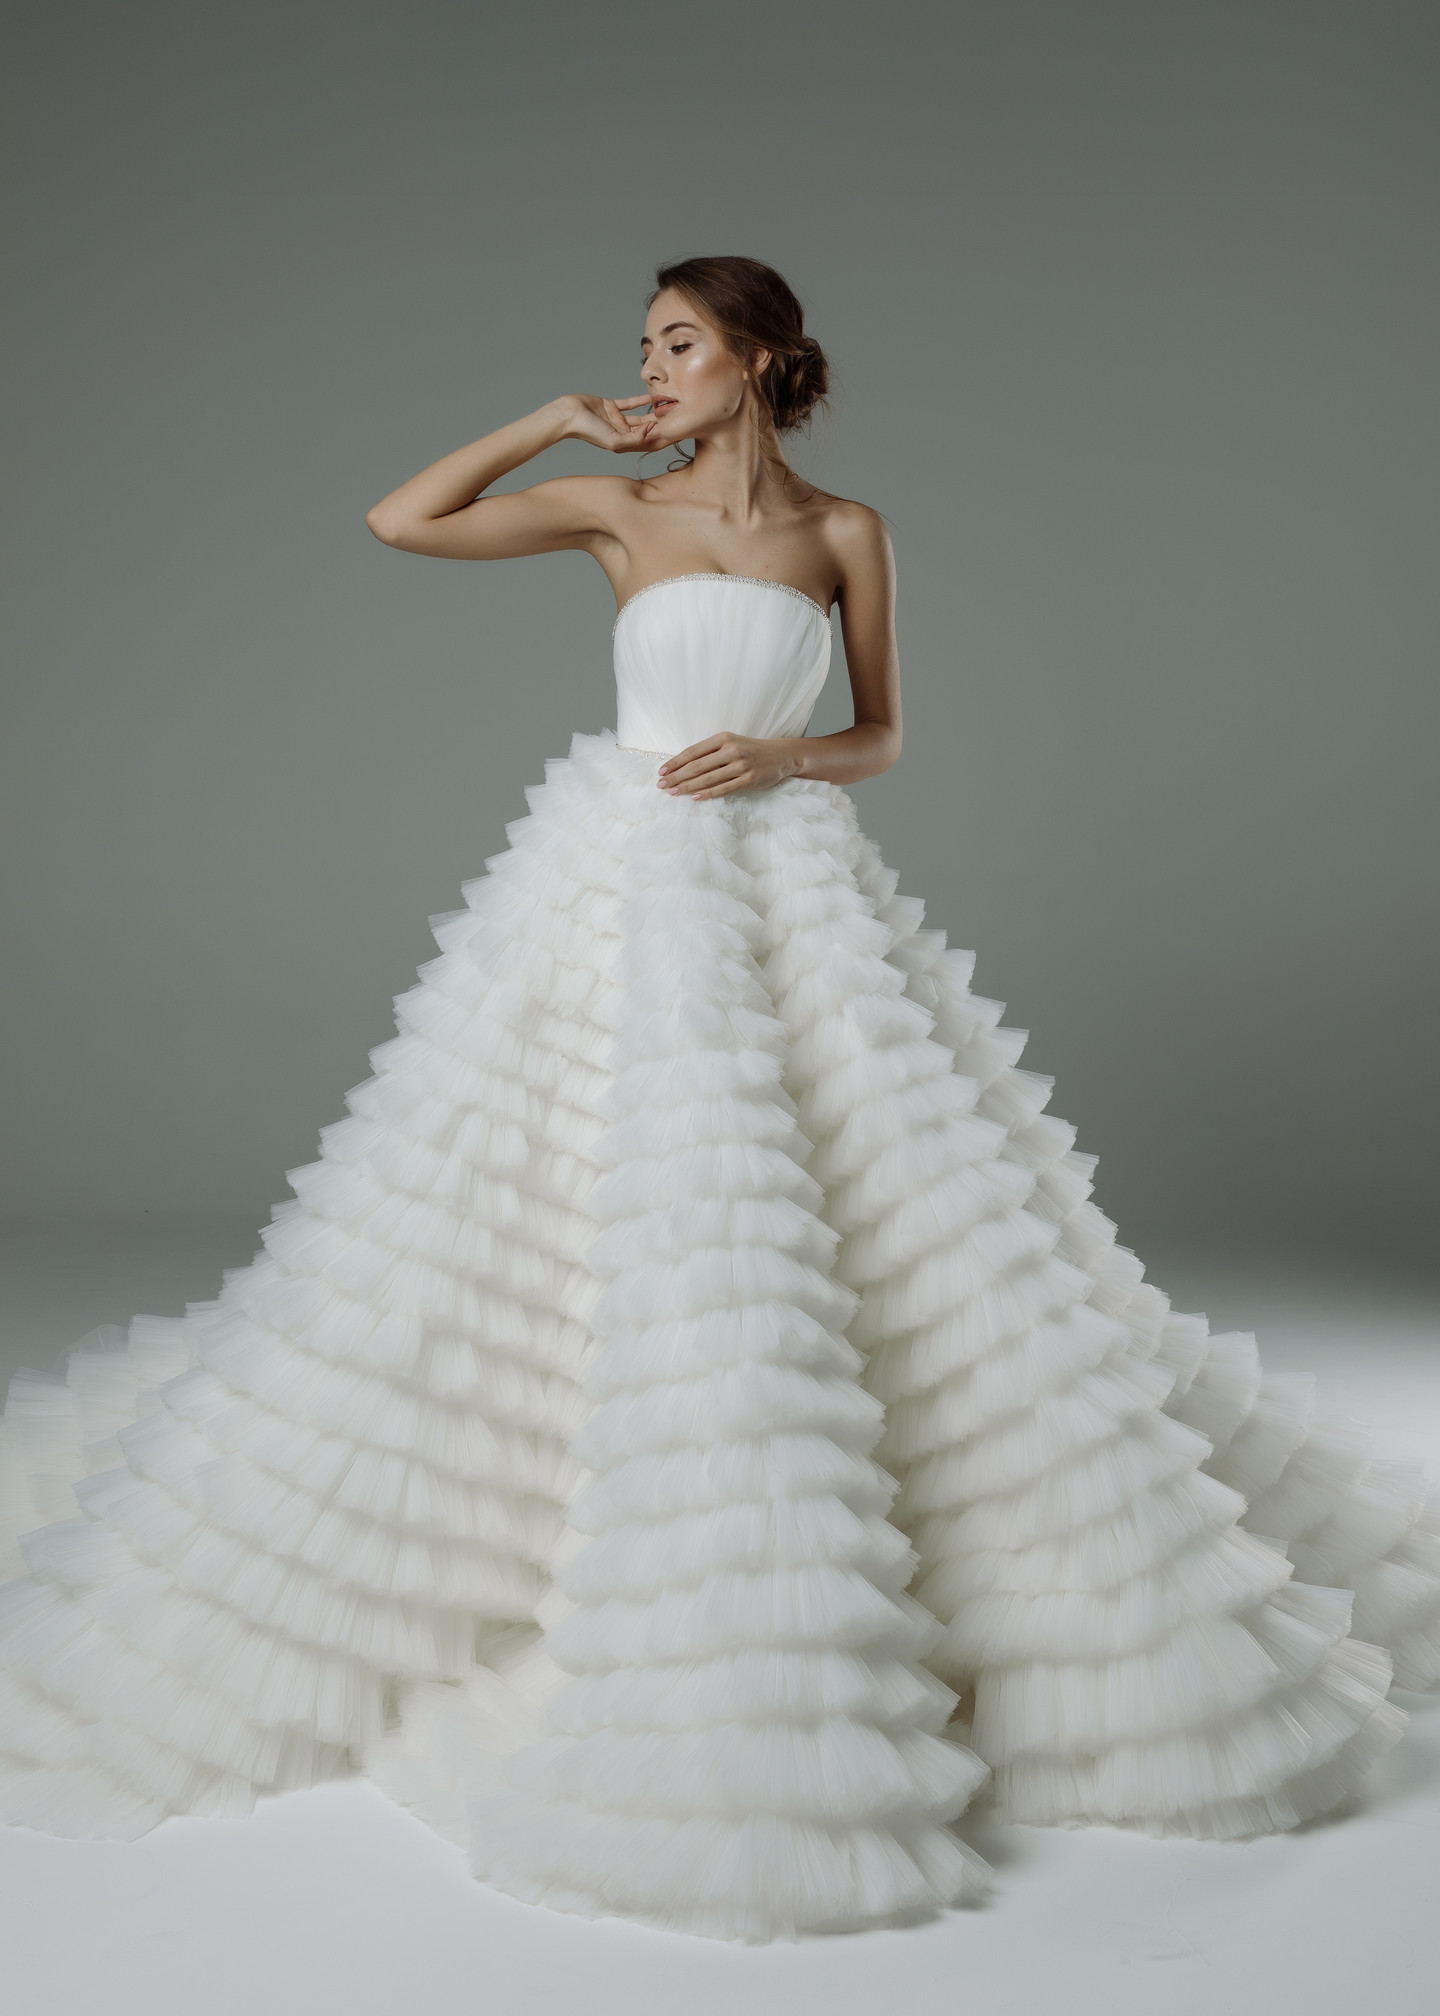 Isidora gown, 2019, couture, dress, bridal, off-white, tulle, embroidery, train, lacing corset, full silhouette, popular, archive